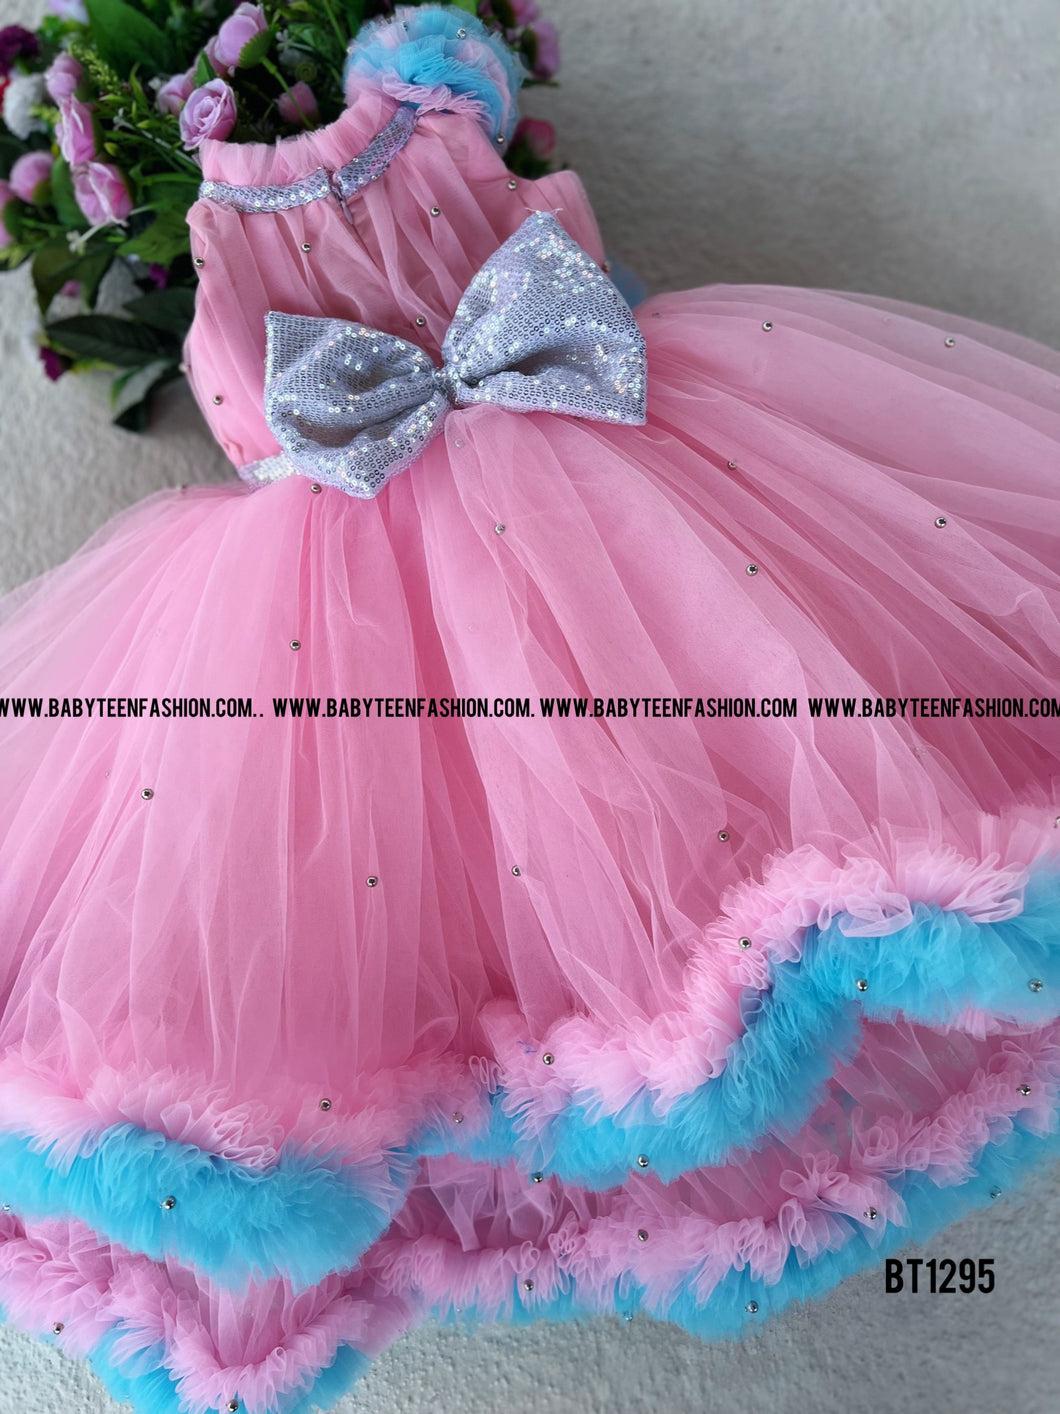 BT1295 Pink Fusion Frock